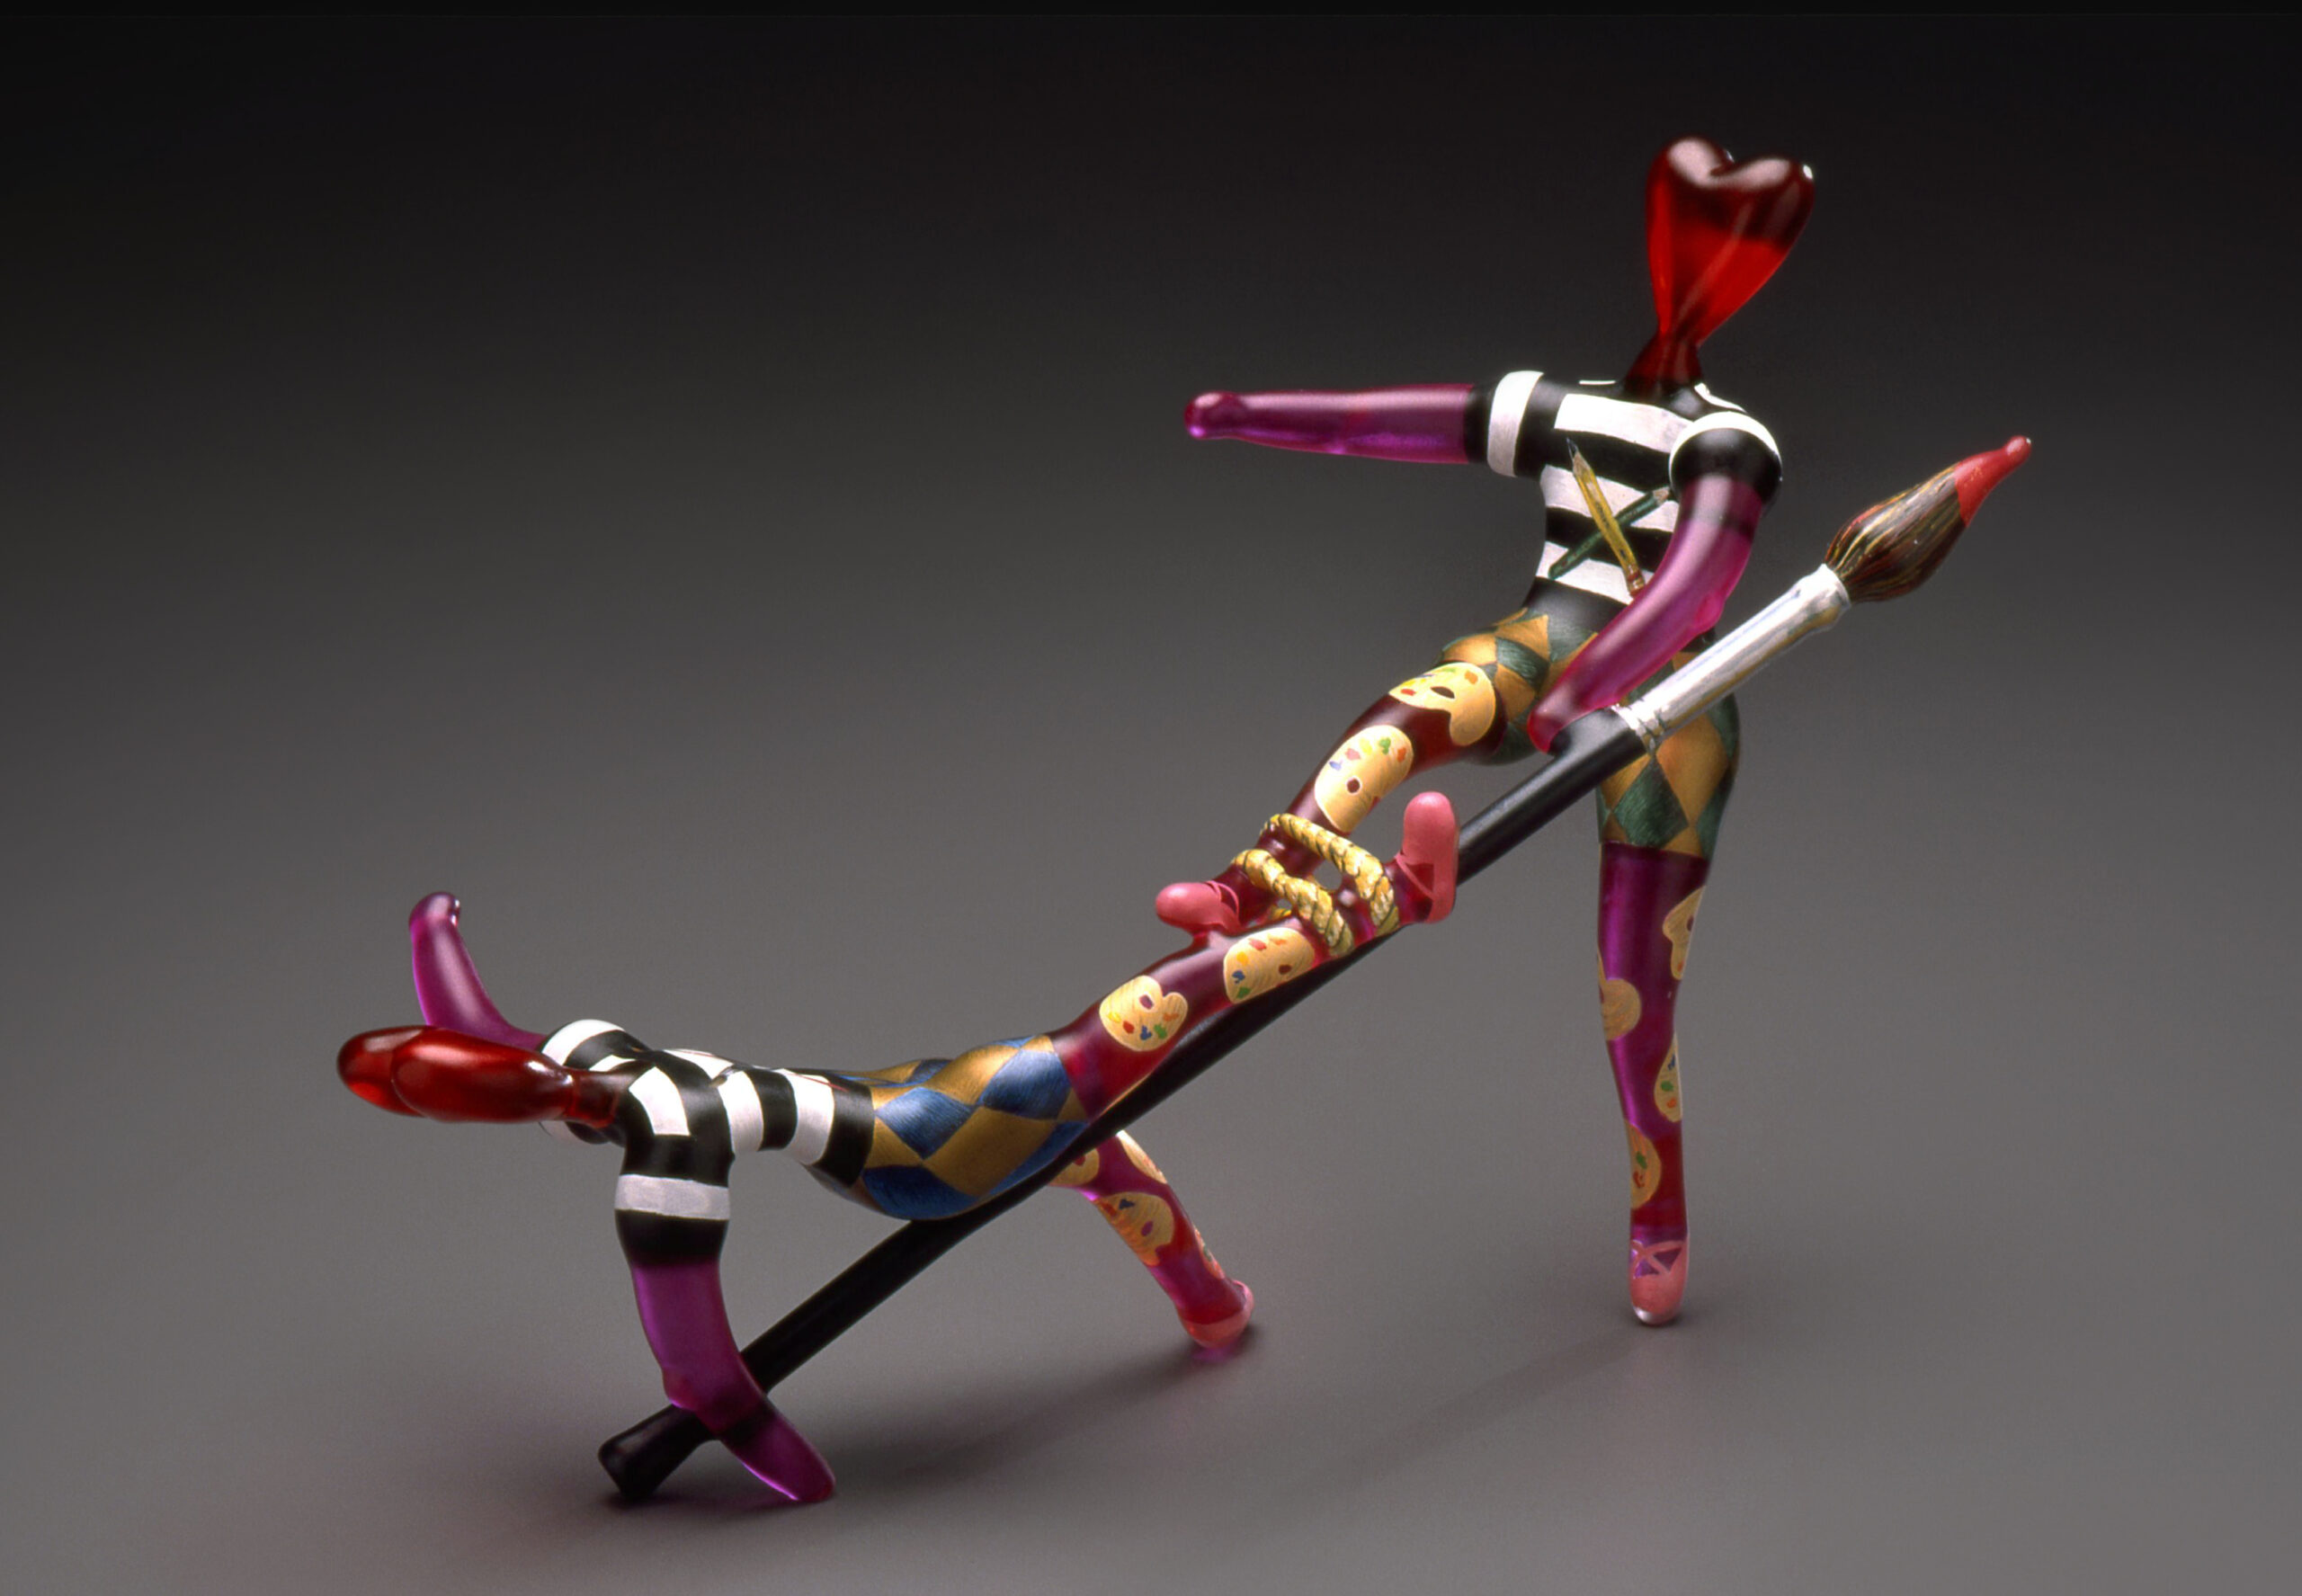 Ginny Ruffner (Seattle), Collaboration, Balance Series, 1995, lampworked glass and mixed media. Collection of Tom Mansfield. Photo by Mike Seidl.